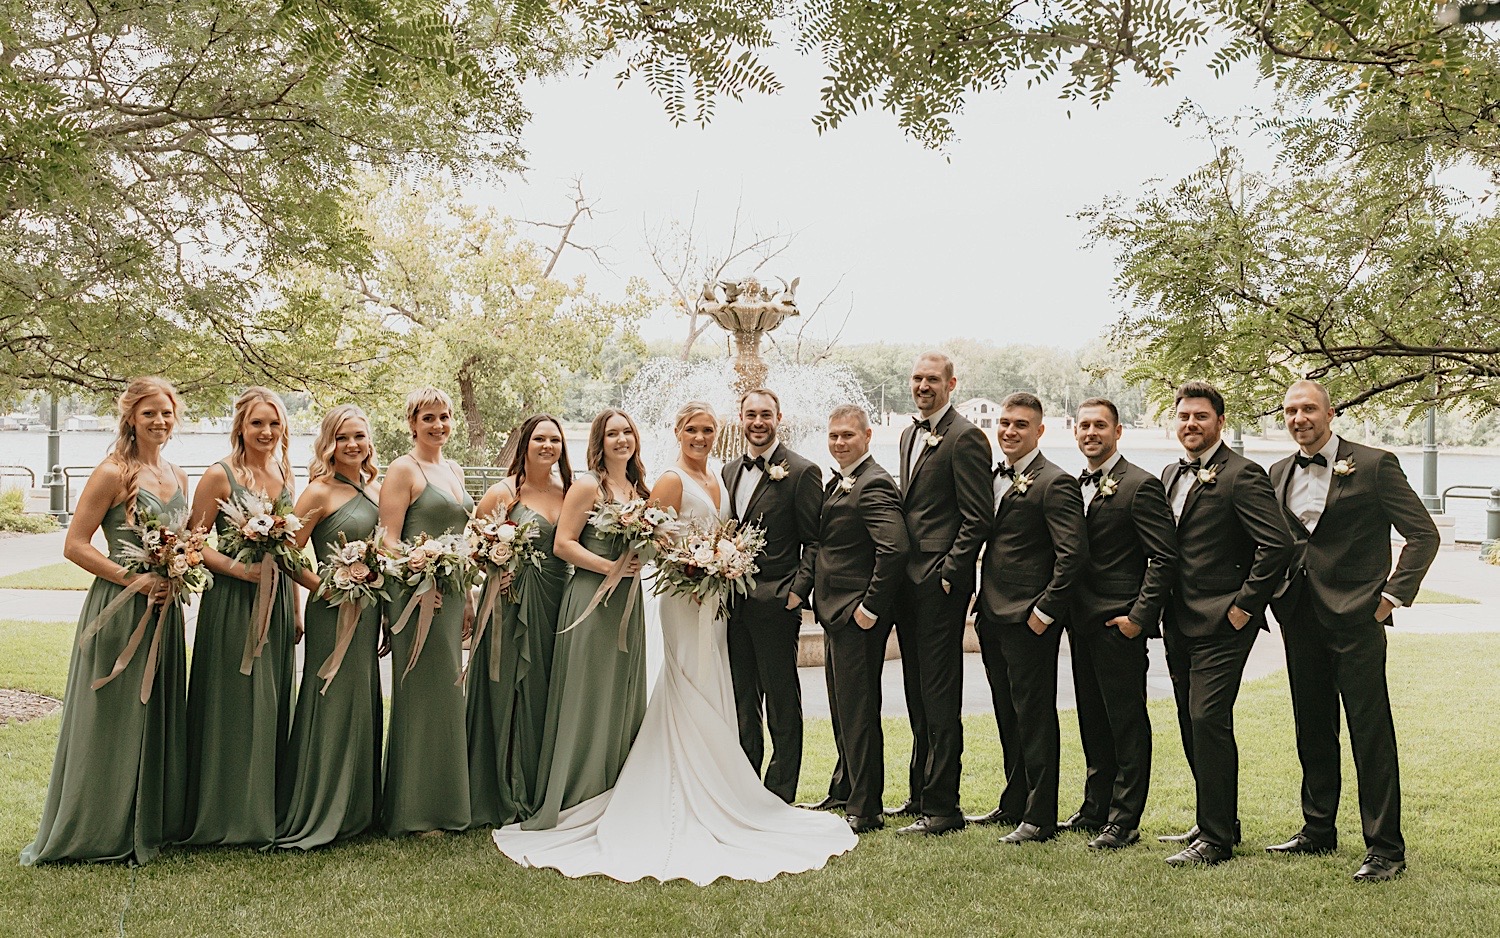 Portrait of a bride, groom, and their wedding parties smiling at the camera while in front of a fountain